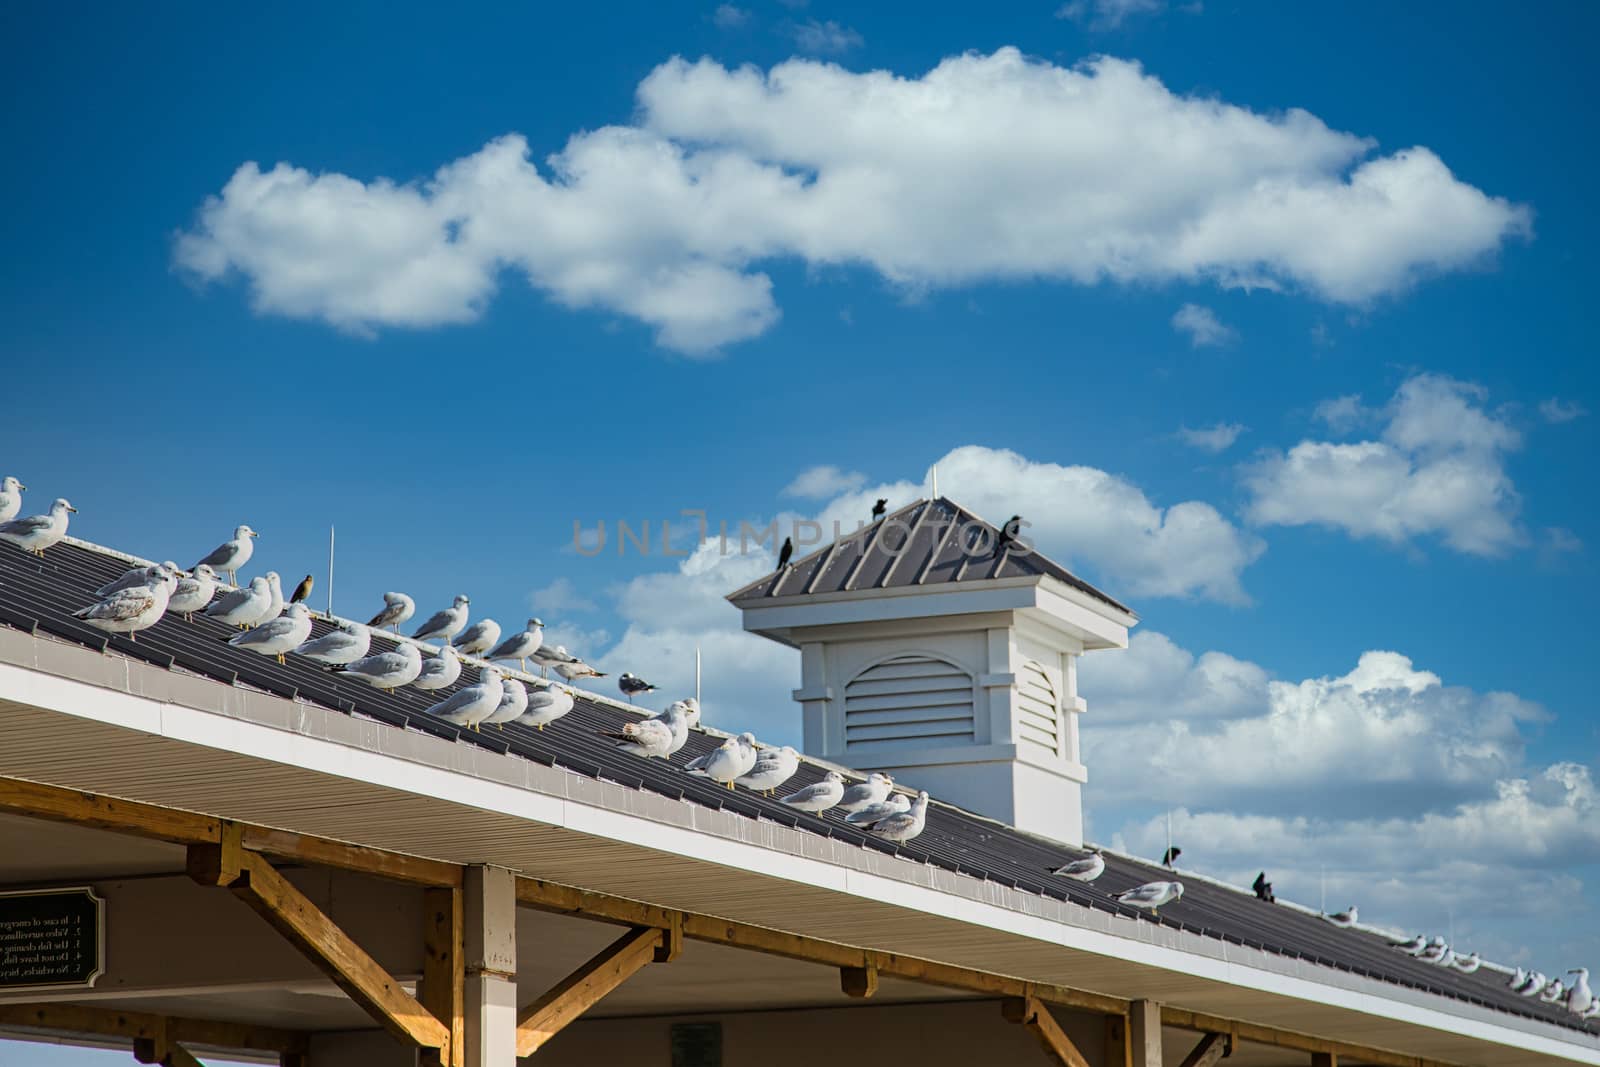 Many seagulls on the metal roof of a pier